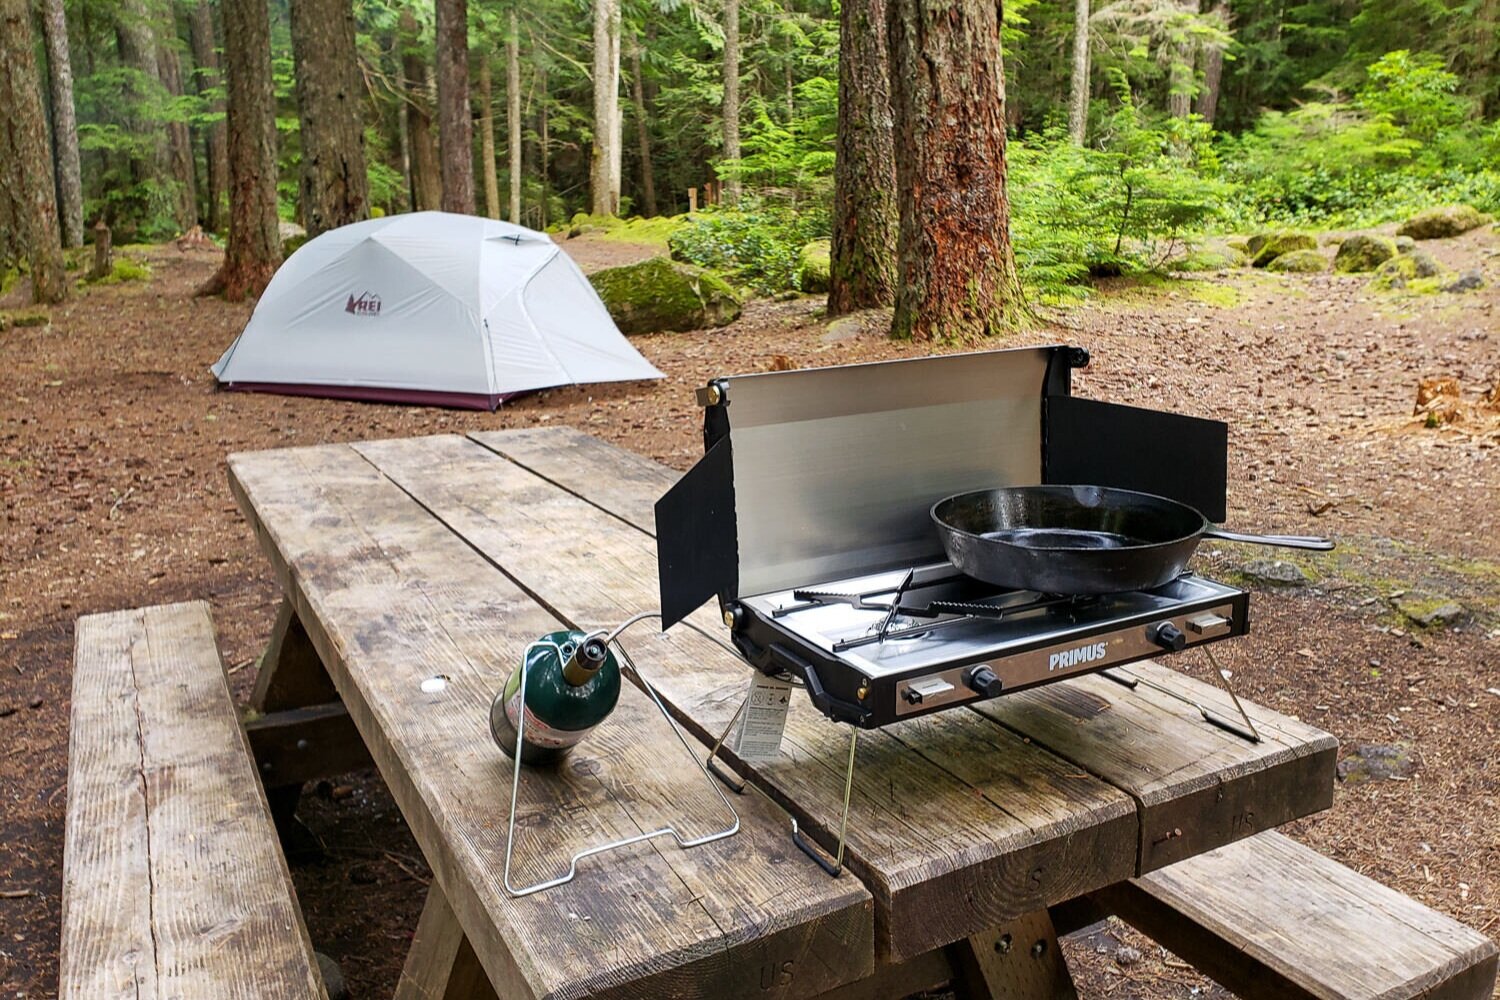 https://www.cleverhiker.com/wp-content/uploads/2023/08/The-Primus-Tupike-Camping-Stove-on-a-picnic-table-with-a-tent-in-the-background.jpeg